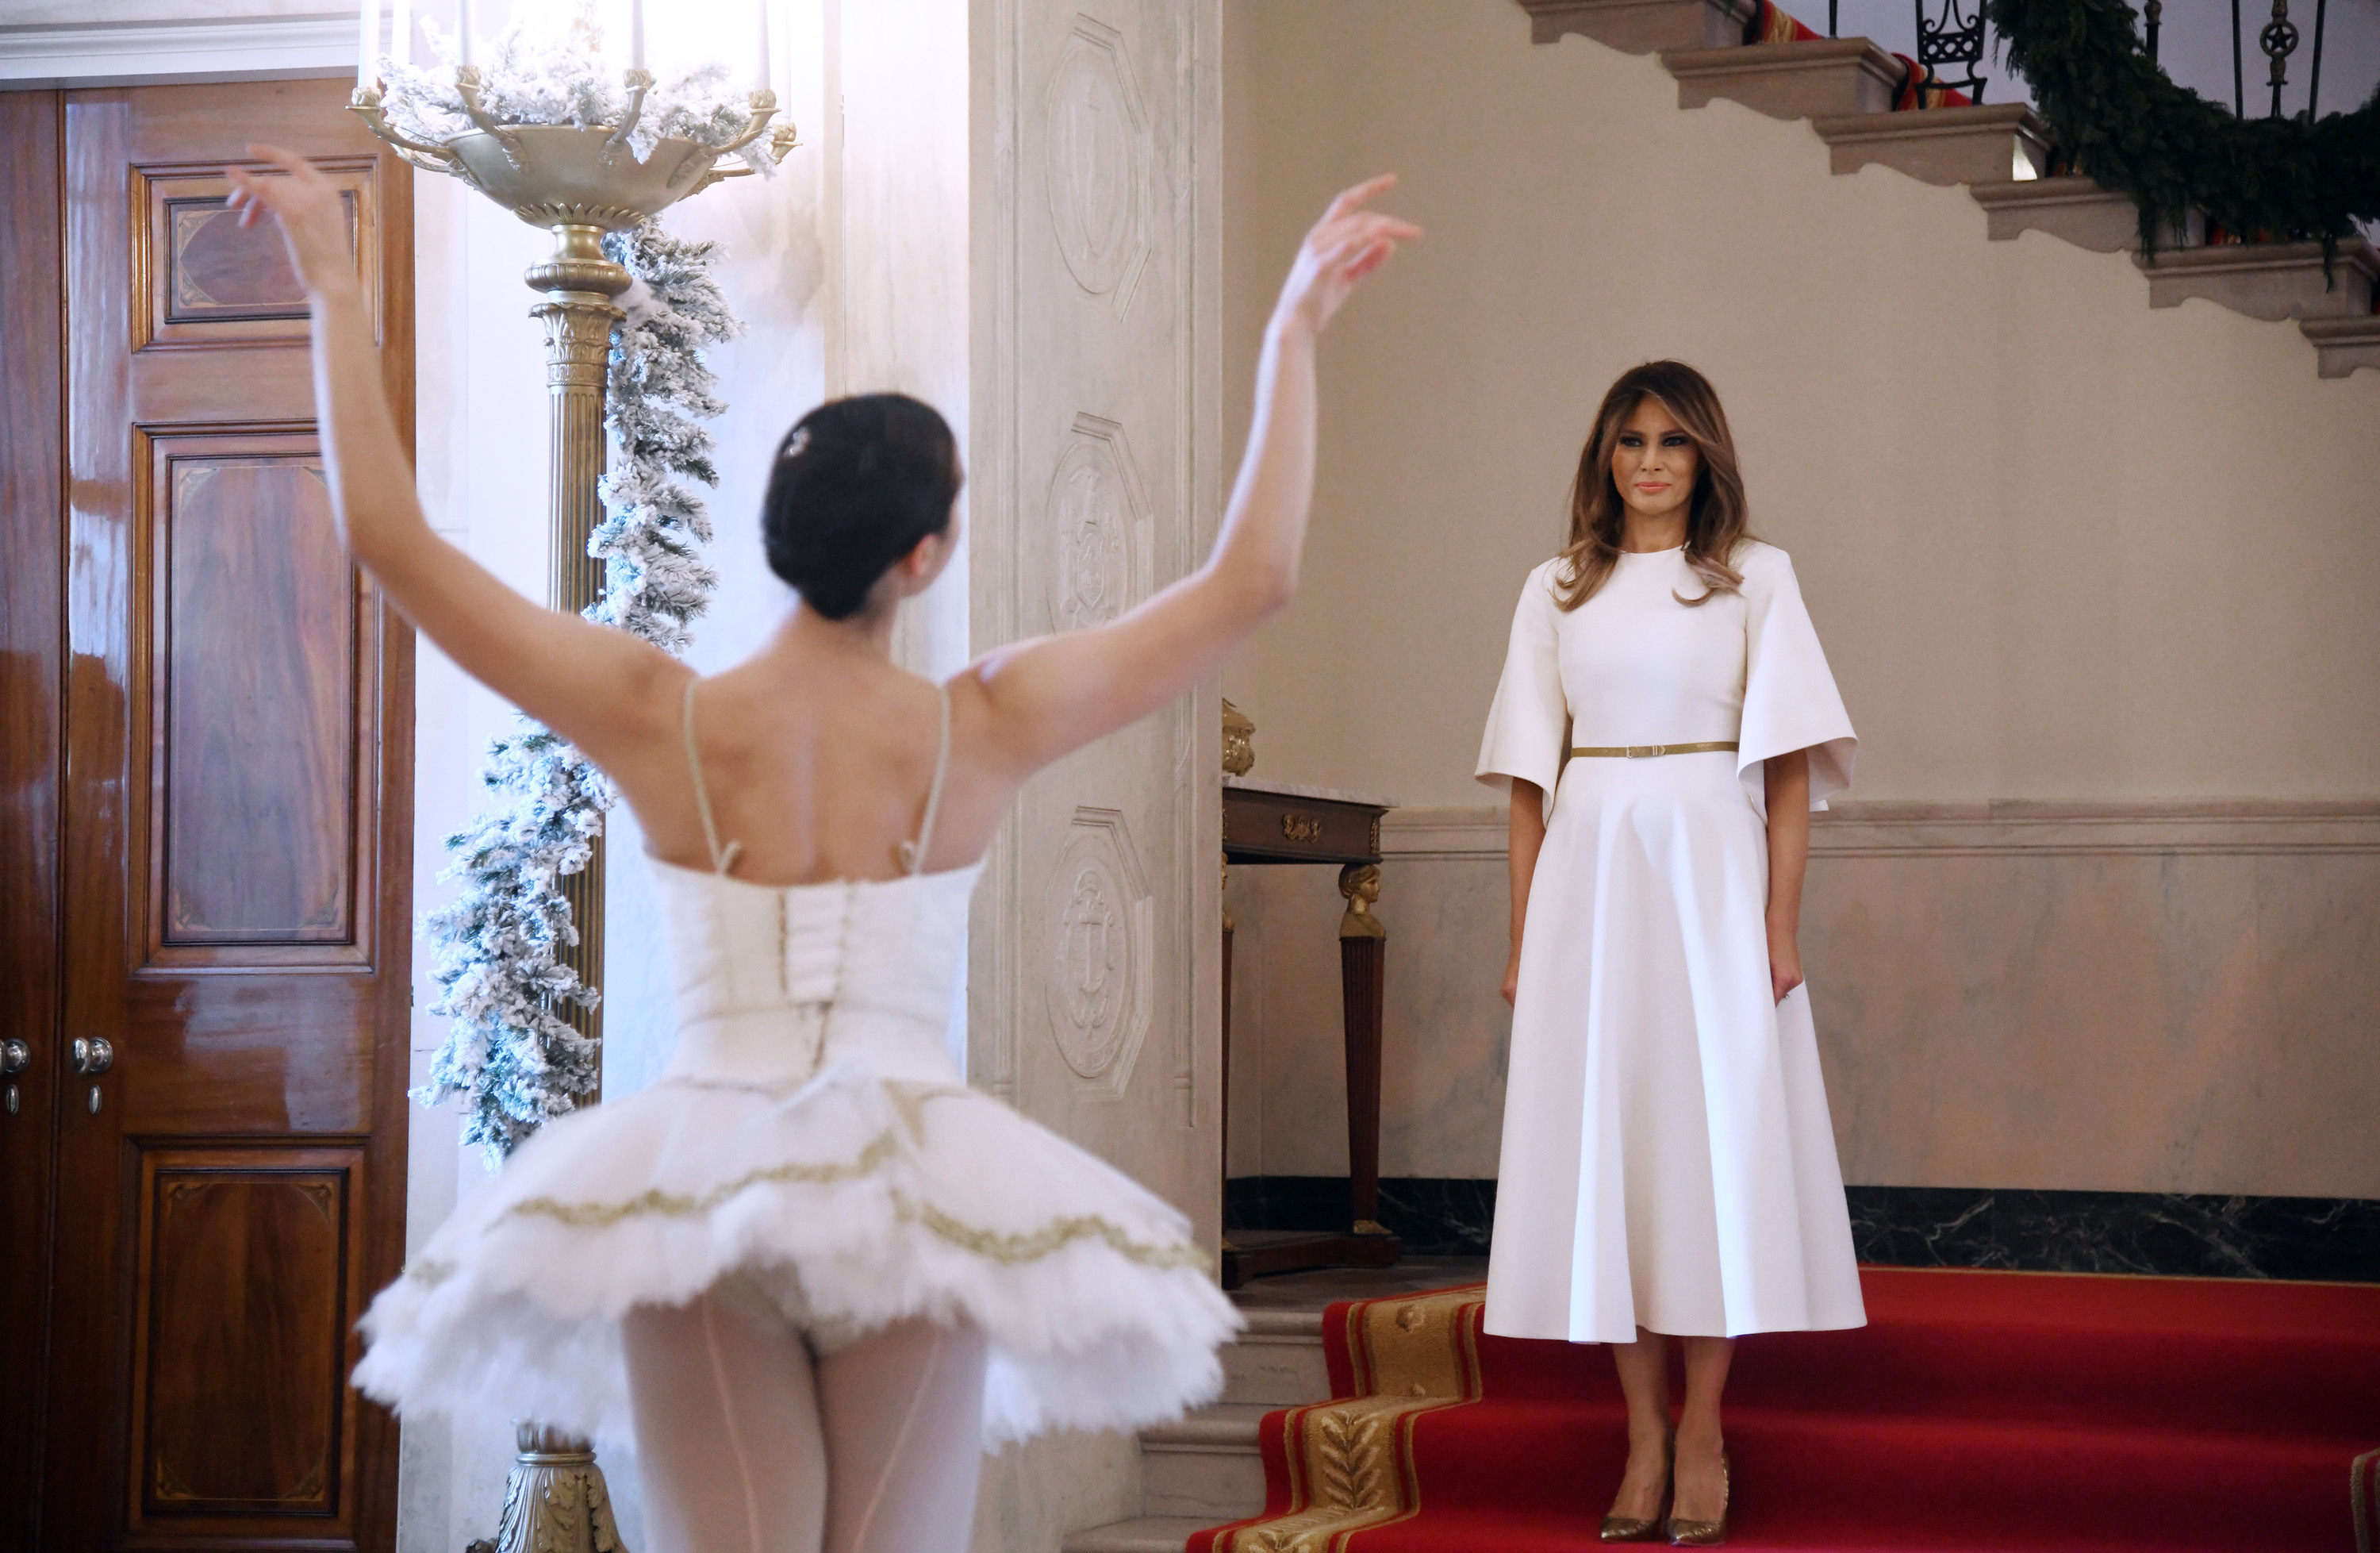 Central Ny Native Performs Ballet For Melania Trump At White House 8250